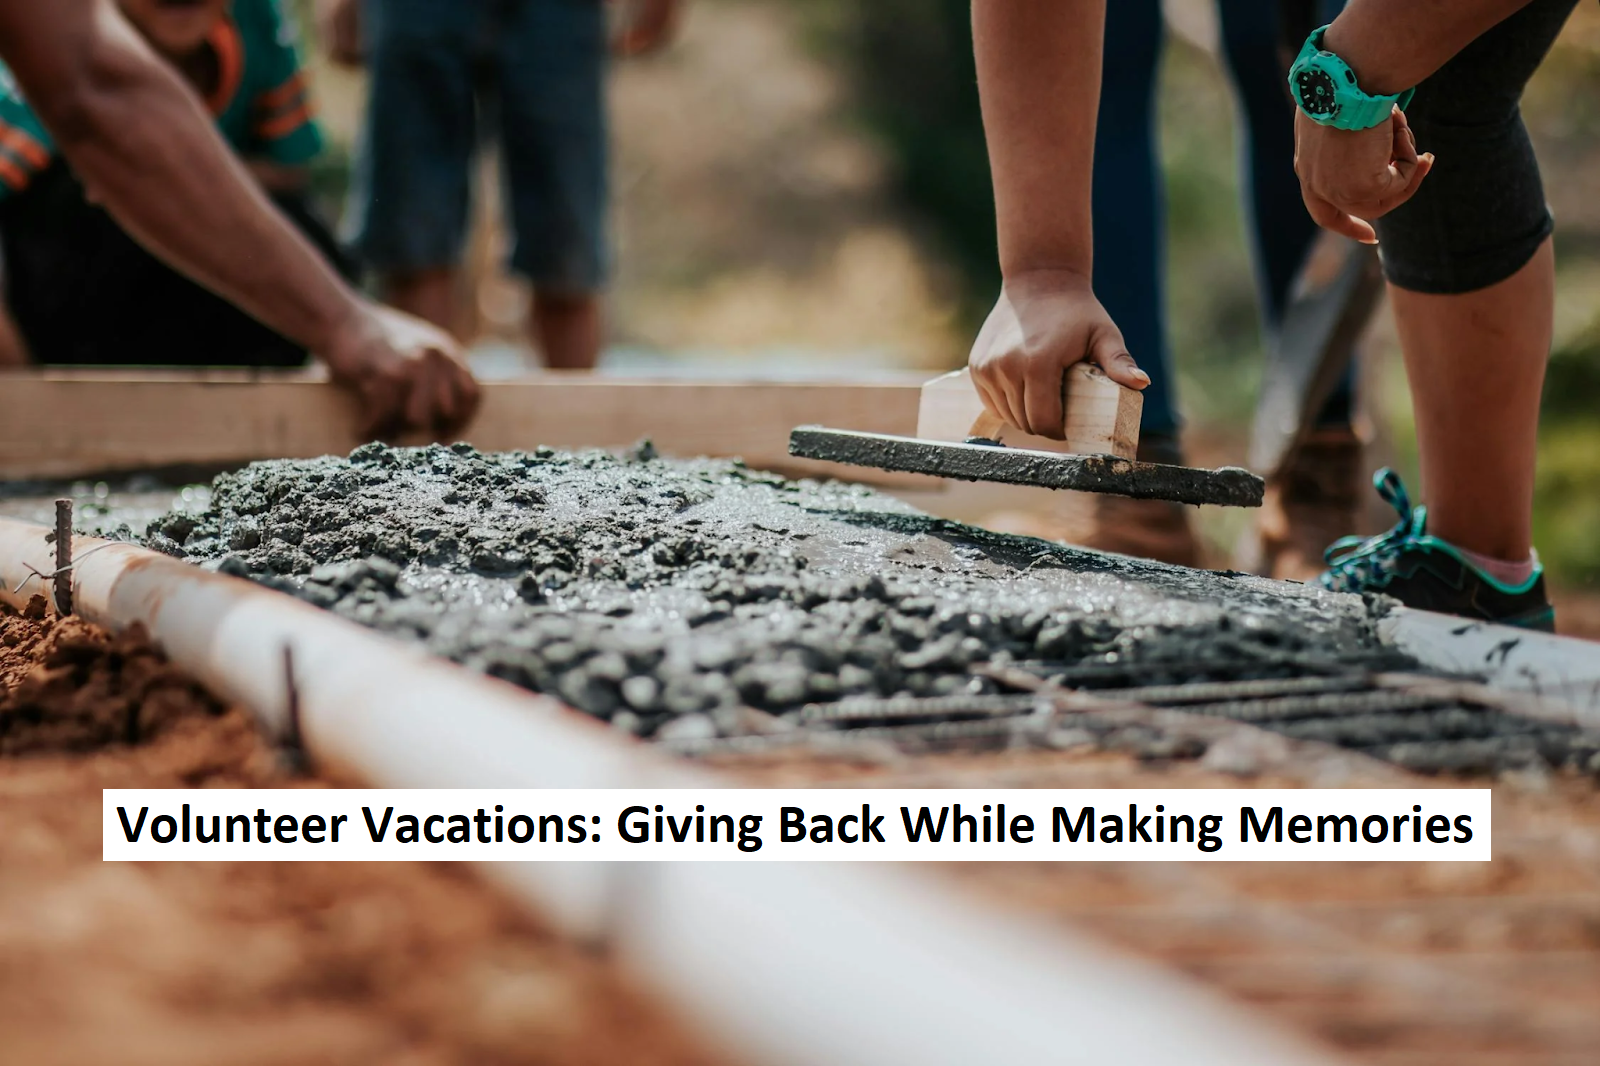 Volunteer Vacations: Giving Back While Making Memories